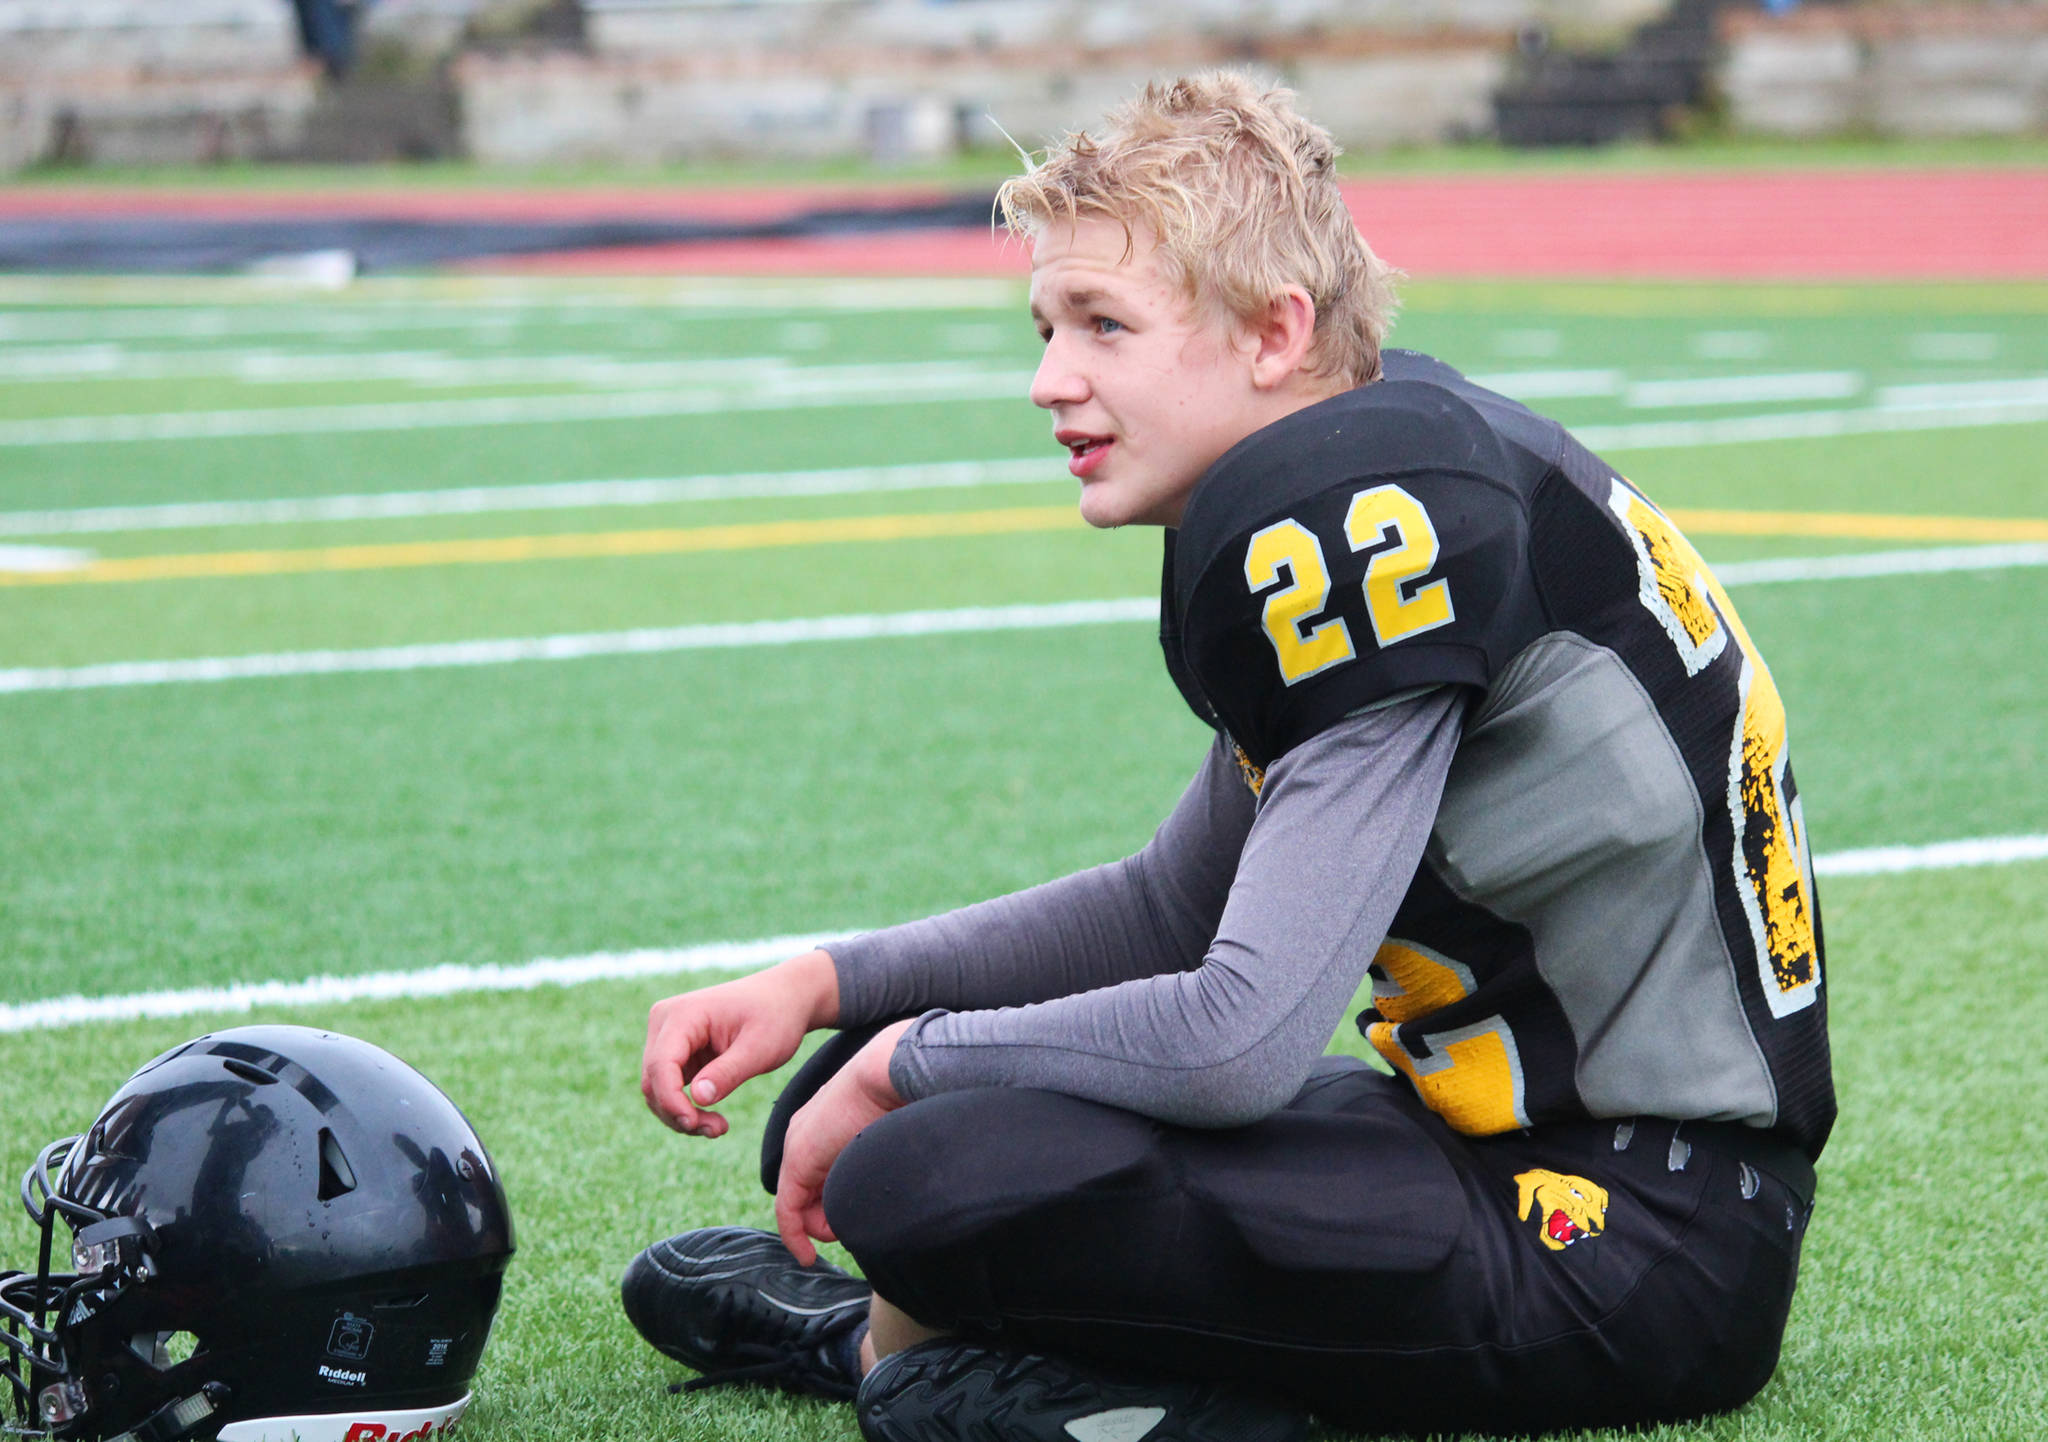 Sophomore Antonin Murachev takes a breather during half time at the Cougar football team’s game against Nikiski High School on Saturday, Sept. 2, 2017 in Homer, Alaska. The Cougars lost 18-40 in their second game of the season. Their first scheduled game was forfeited due to not having enough players at that point in the season. (Photo by Megan Pacer/Homer News)